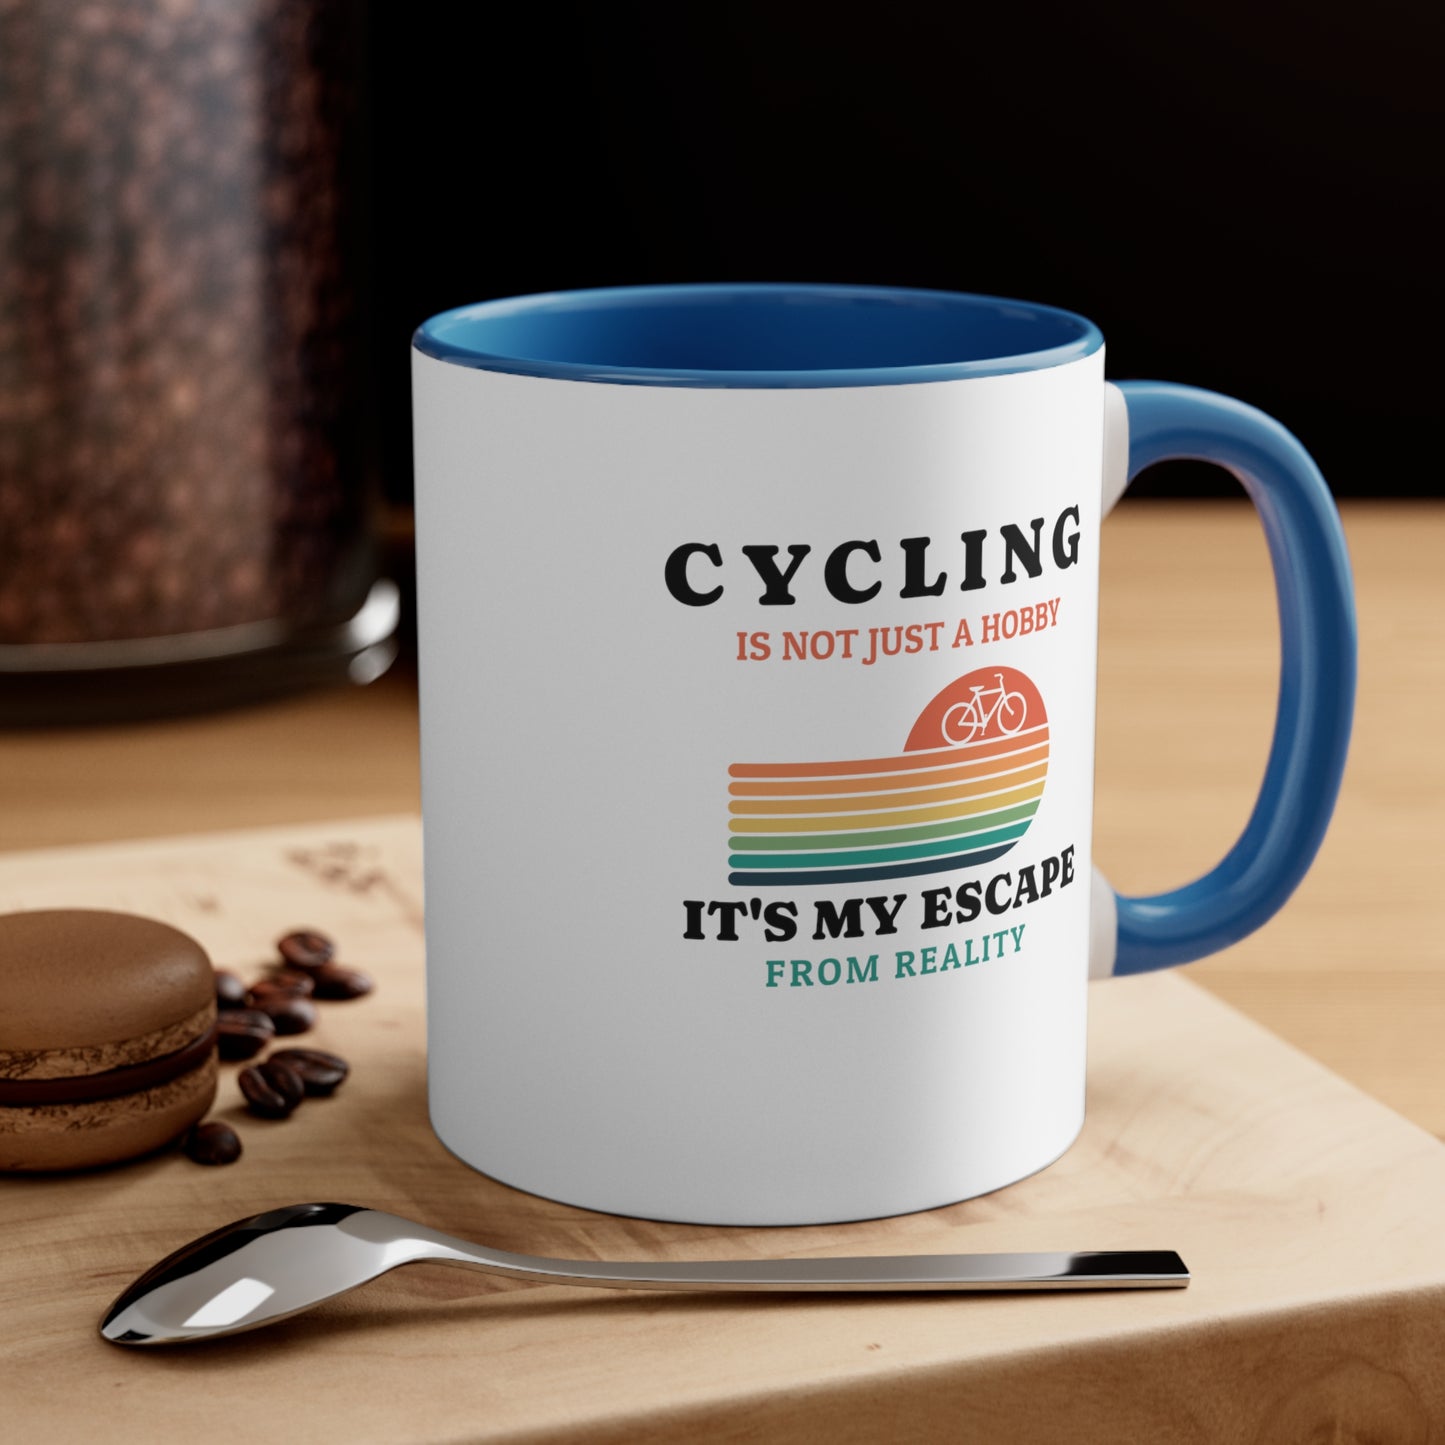 Cycling is not just a Hobby, it's my escape from reality Mug